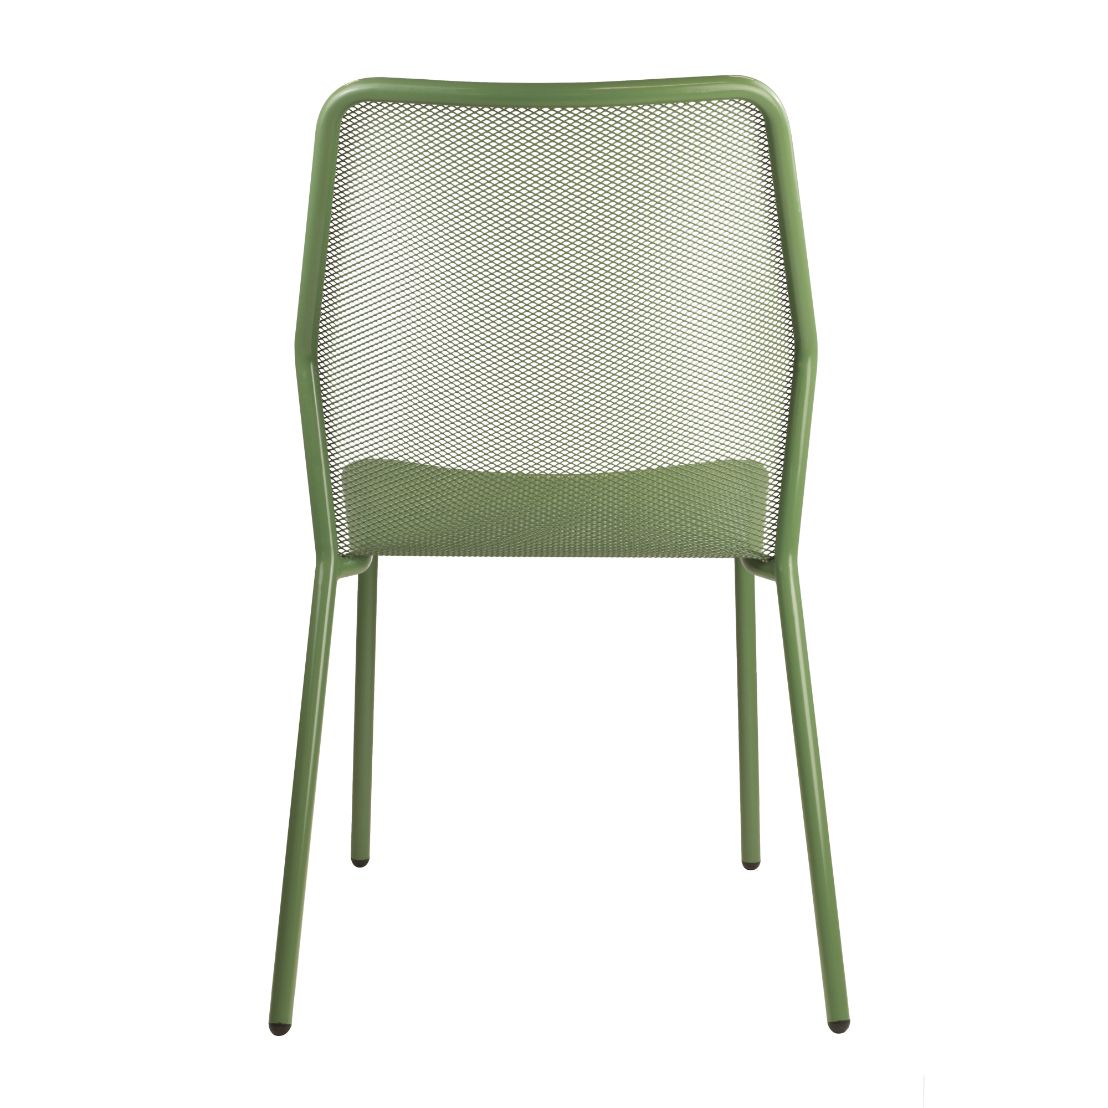 Olive Green Nova Stackable Chair for Indoor and Outdoor Use - Back View